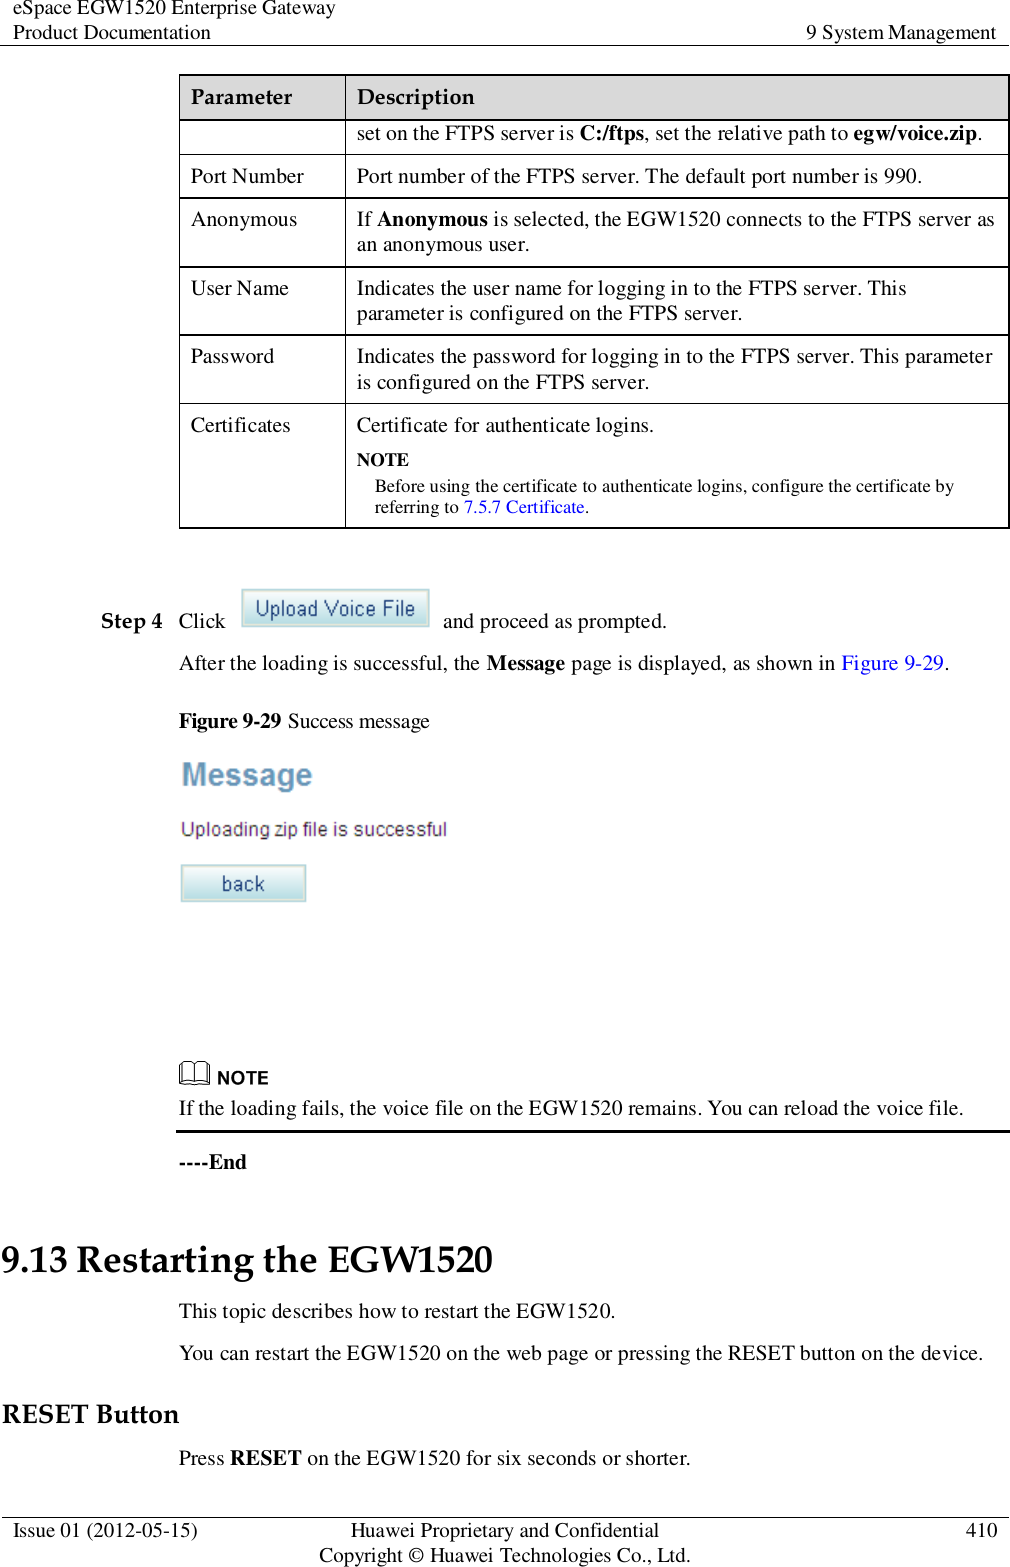 eSpace EGW1520 Enterprise Gateway Product Documentation 9 System Management  Issue 01 (2012-05-15) Huawei Proprietary and Confidential                                     Copyright © Huawei Technologies Co., Ltd. 410  Parameter Description set on the FTPS server is C:/ftps, set the relative path to egw/voice.zip. Port Number Port number of the FTPS server. The default port number is 990. Anonymous If Anonymous is selected, the EGW1520 connects to the FTPS server as an anonymous user. User Name Indicates the user name for logging in to the FTPS server. This parameter is configured on the FTPS server. Password Indicates the password for logging in to the FTPS server. This parameter is configured on the FTPS server. Certificates Certificate for authenticate logins. NOTE Before using the certificate to authenticate logins, configure the certificate by referring to 7.5.7 Certificate.  Step 4 Click    and proceed as prompted. After the loading is successful, the Message page is displayed, as shown in Figure 9-29. Figure 9-29 Success message     If the loading fails, the voice file on the EGW1520 remains. You can reload the voice file. ----End 9.13 Restarting the EGW1520 This topic describes how to restart the EGW1520. You can restart the EGW1520 on the web page or pressing the RESET button on the device. RESET Button Press RESET on the EGW1520 for six seconds or shorter. 